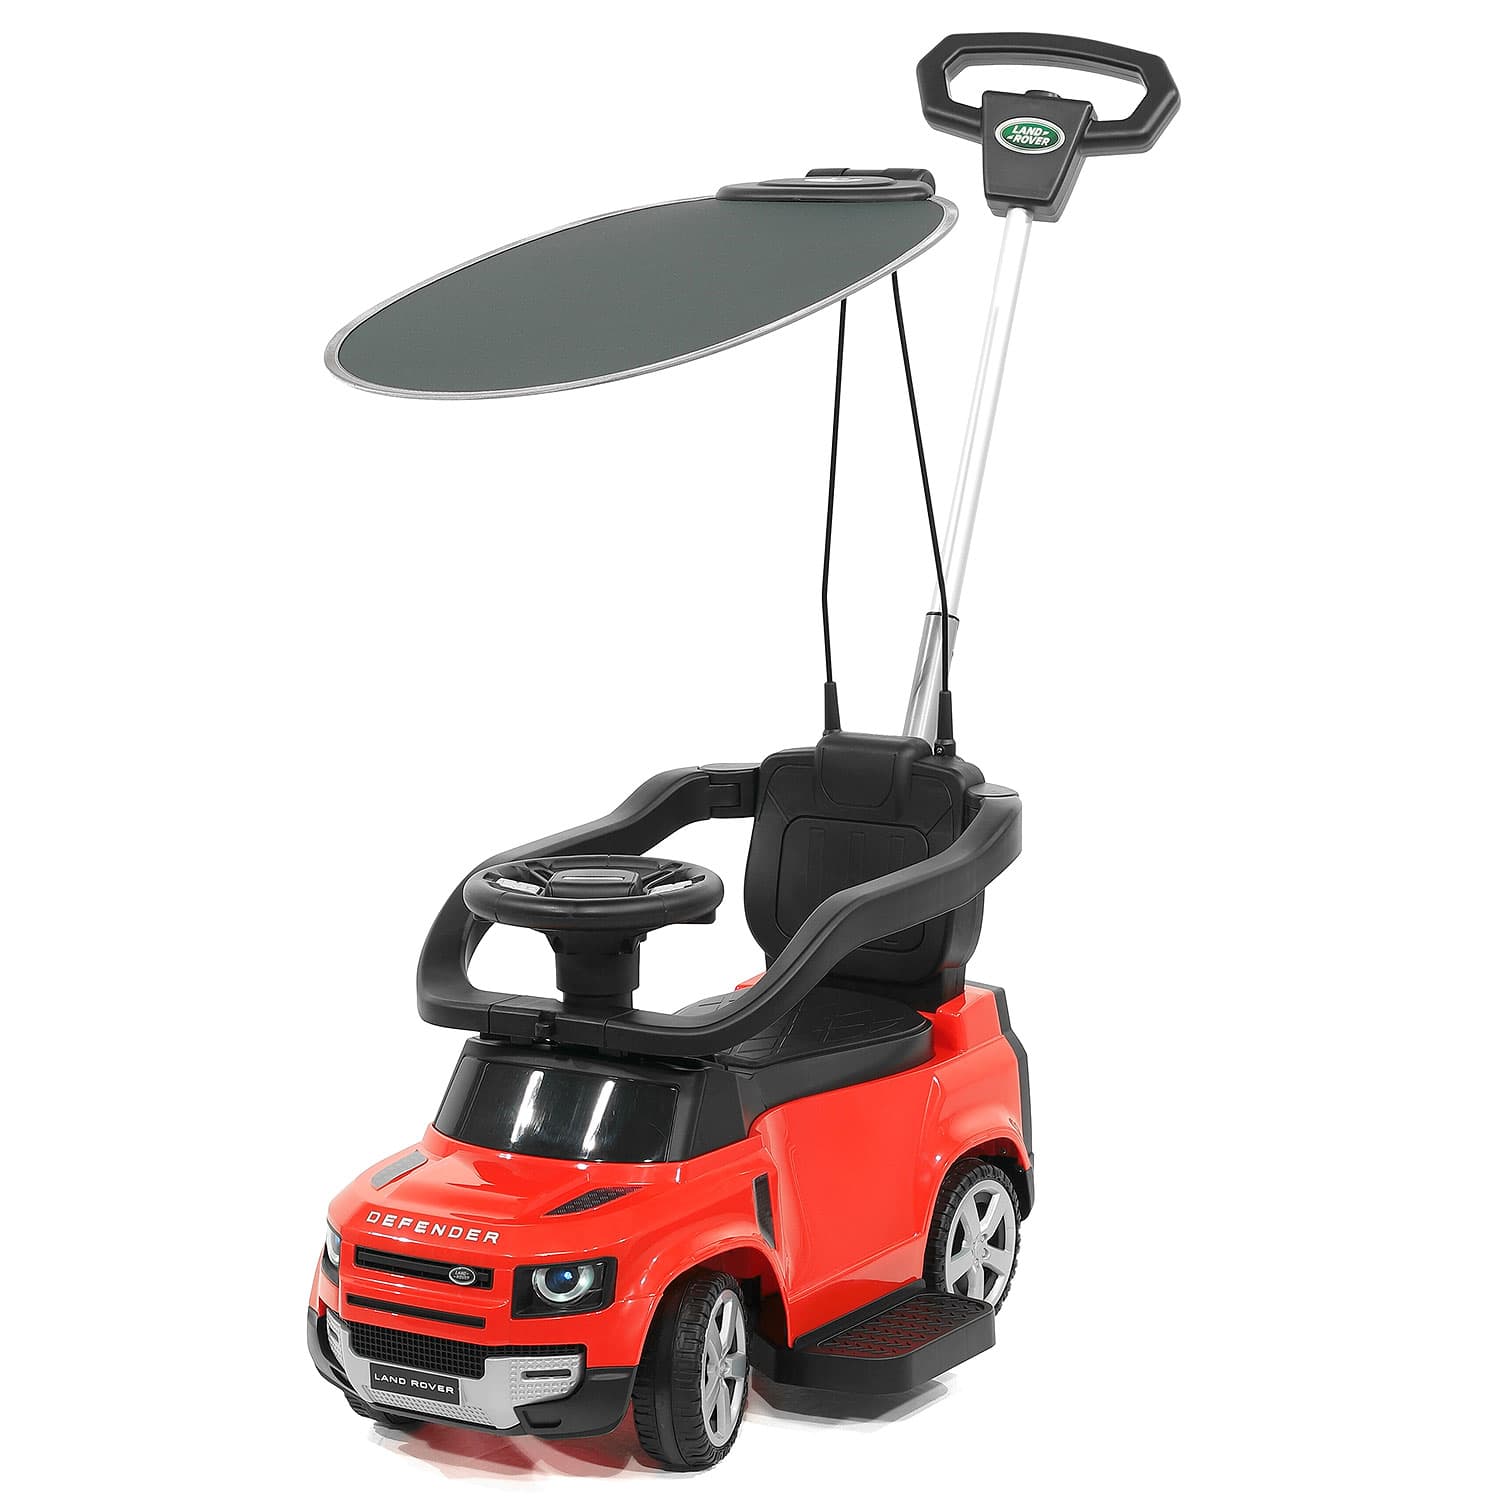 Land Rover Defender Kids Ride on Push Car with Sunshade Canopy | Red